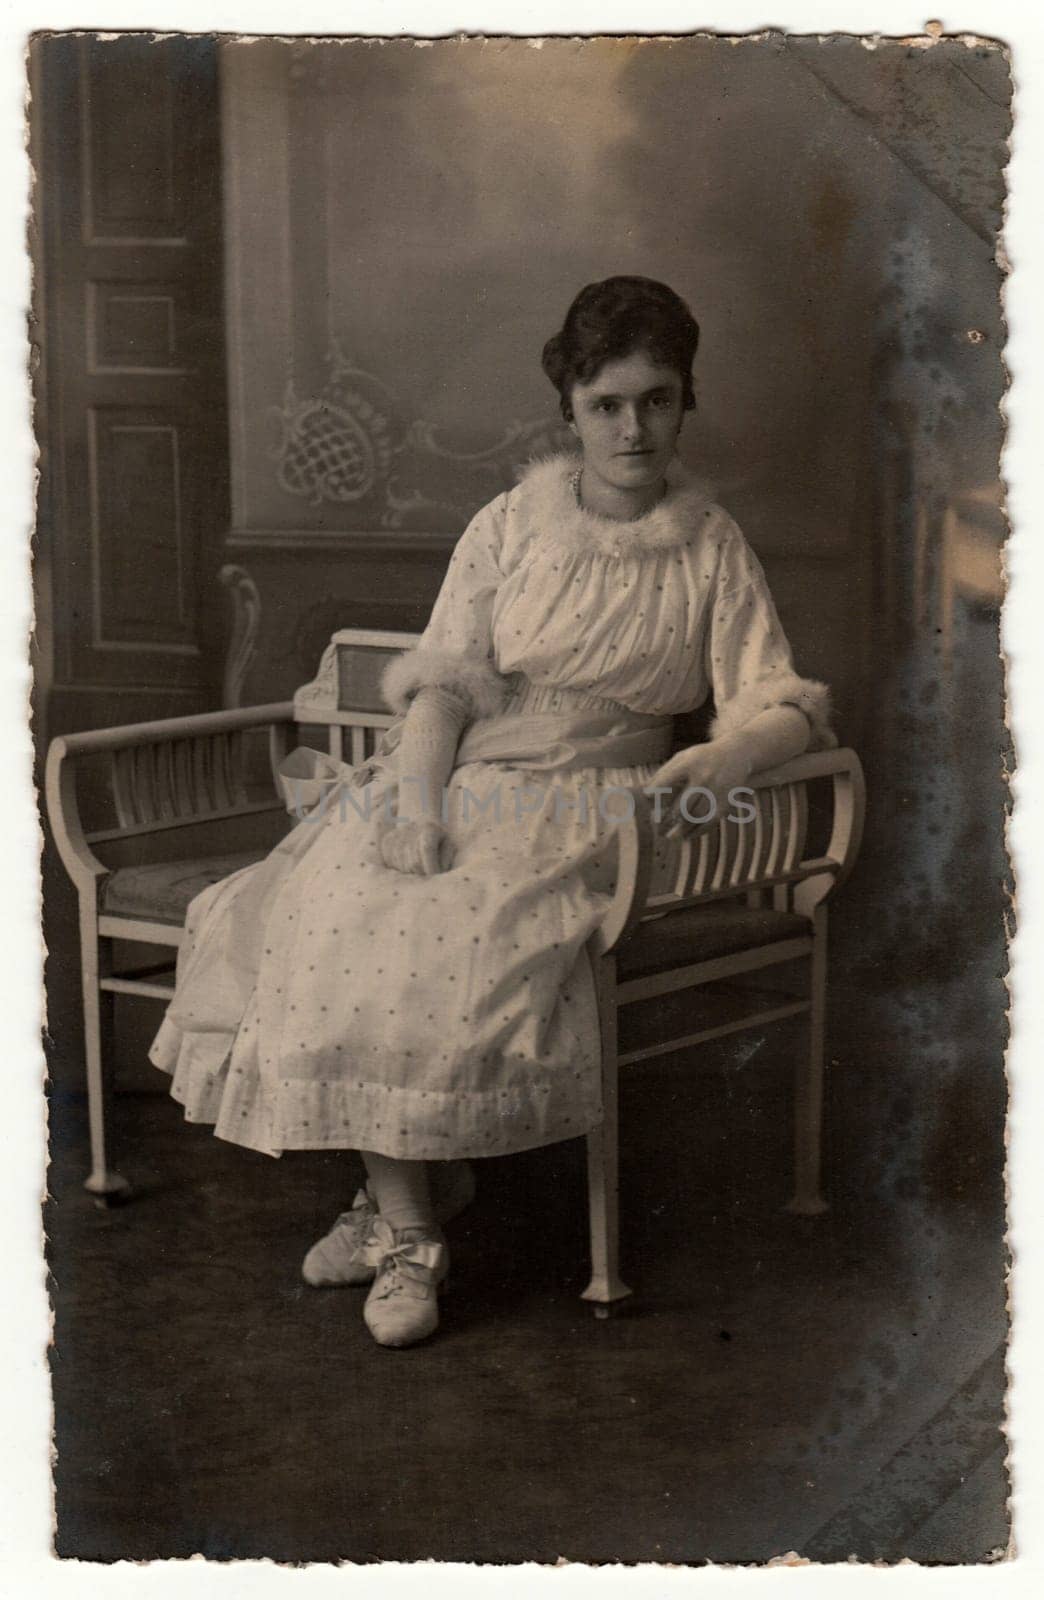 GERMANY - CIRCA 1920s: Vintage photo shows woman sits on a white period bench. Retro black and white studio photography.